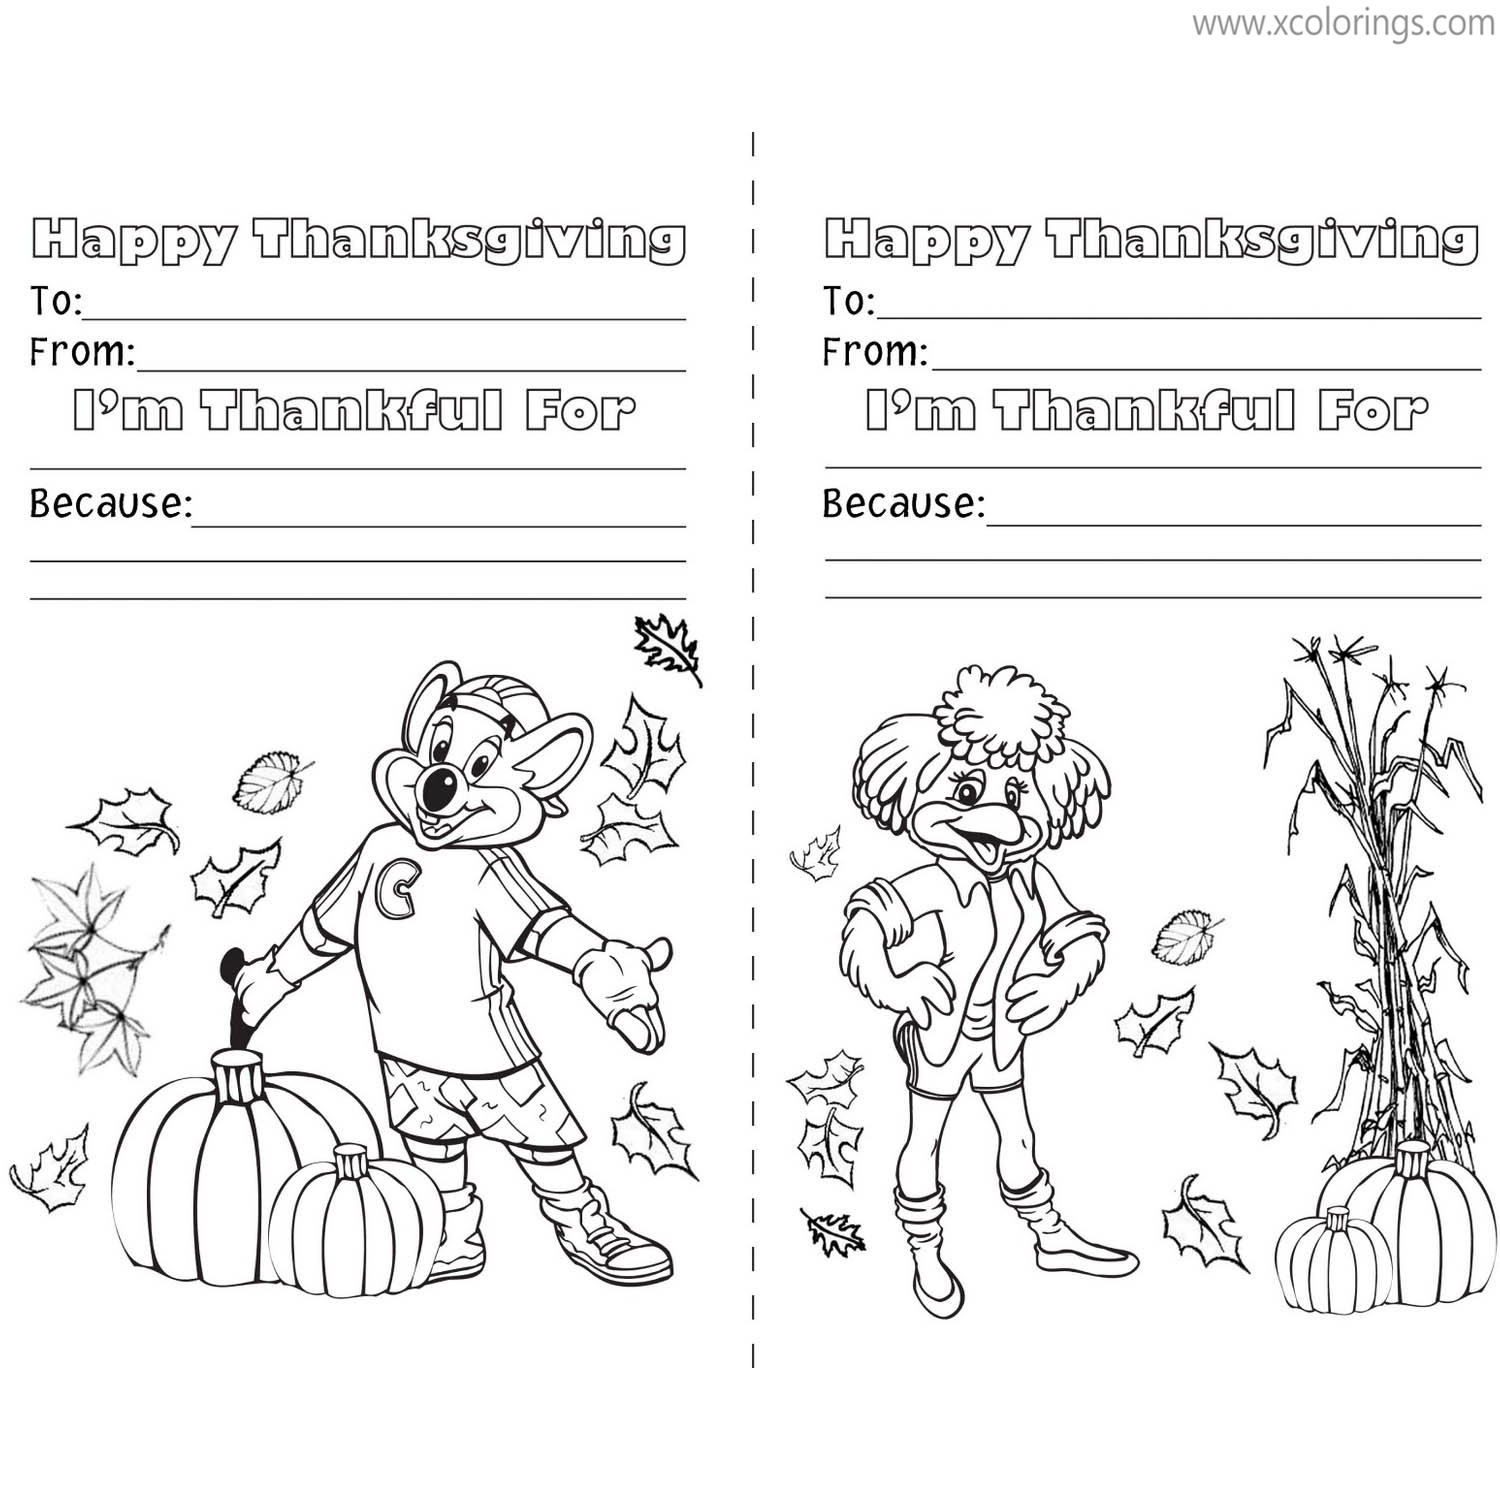 Free Chuck E Cheese Coloring Pages Thanksgiving Thank You Card printable